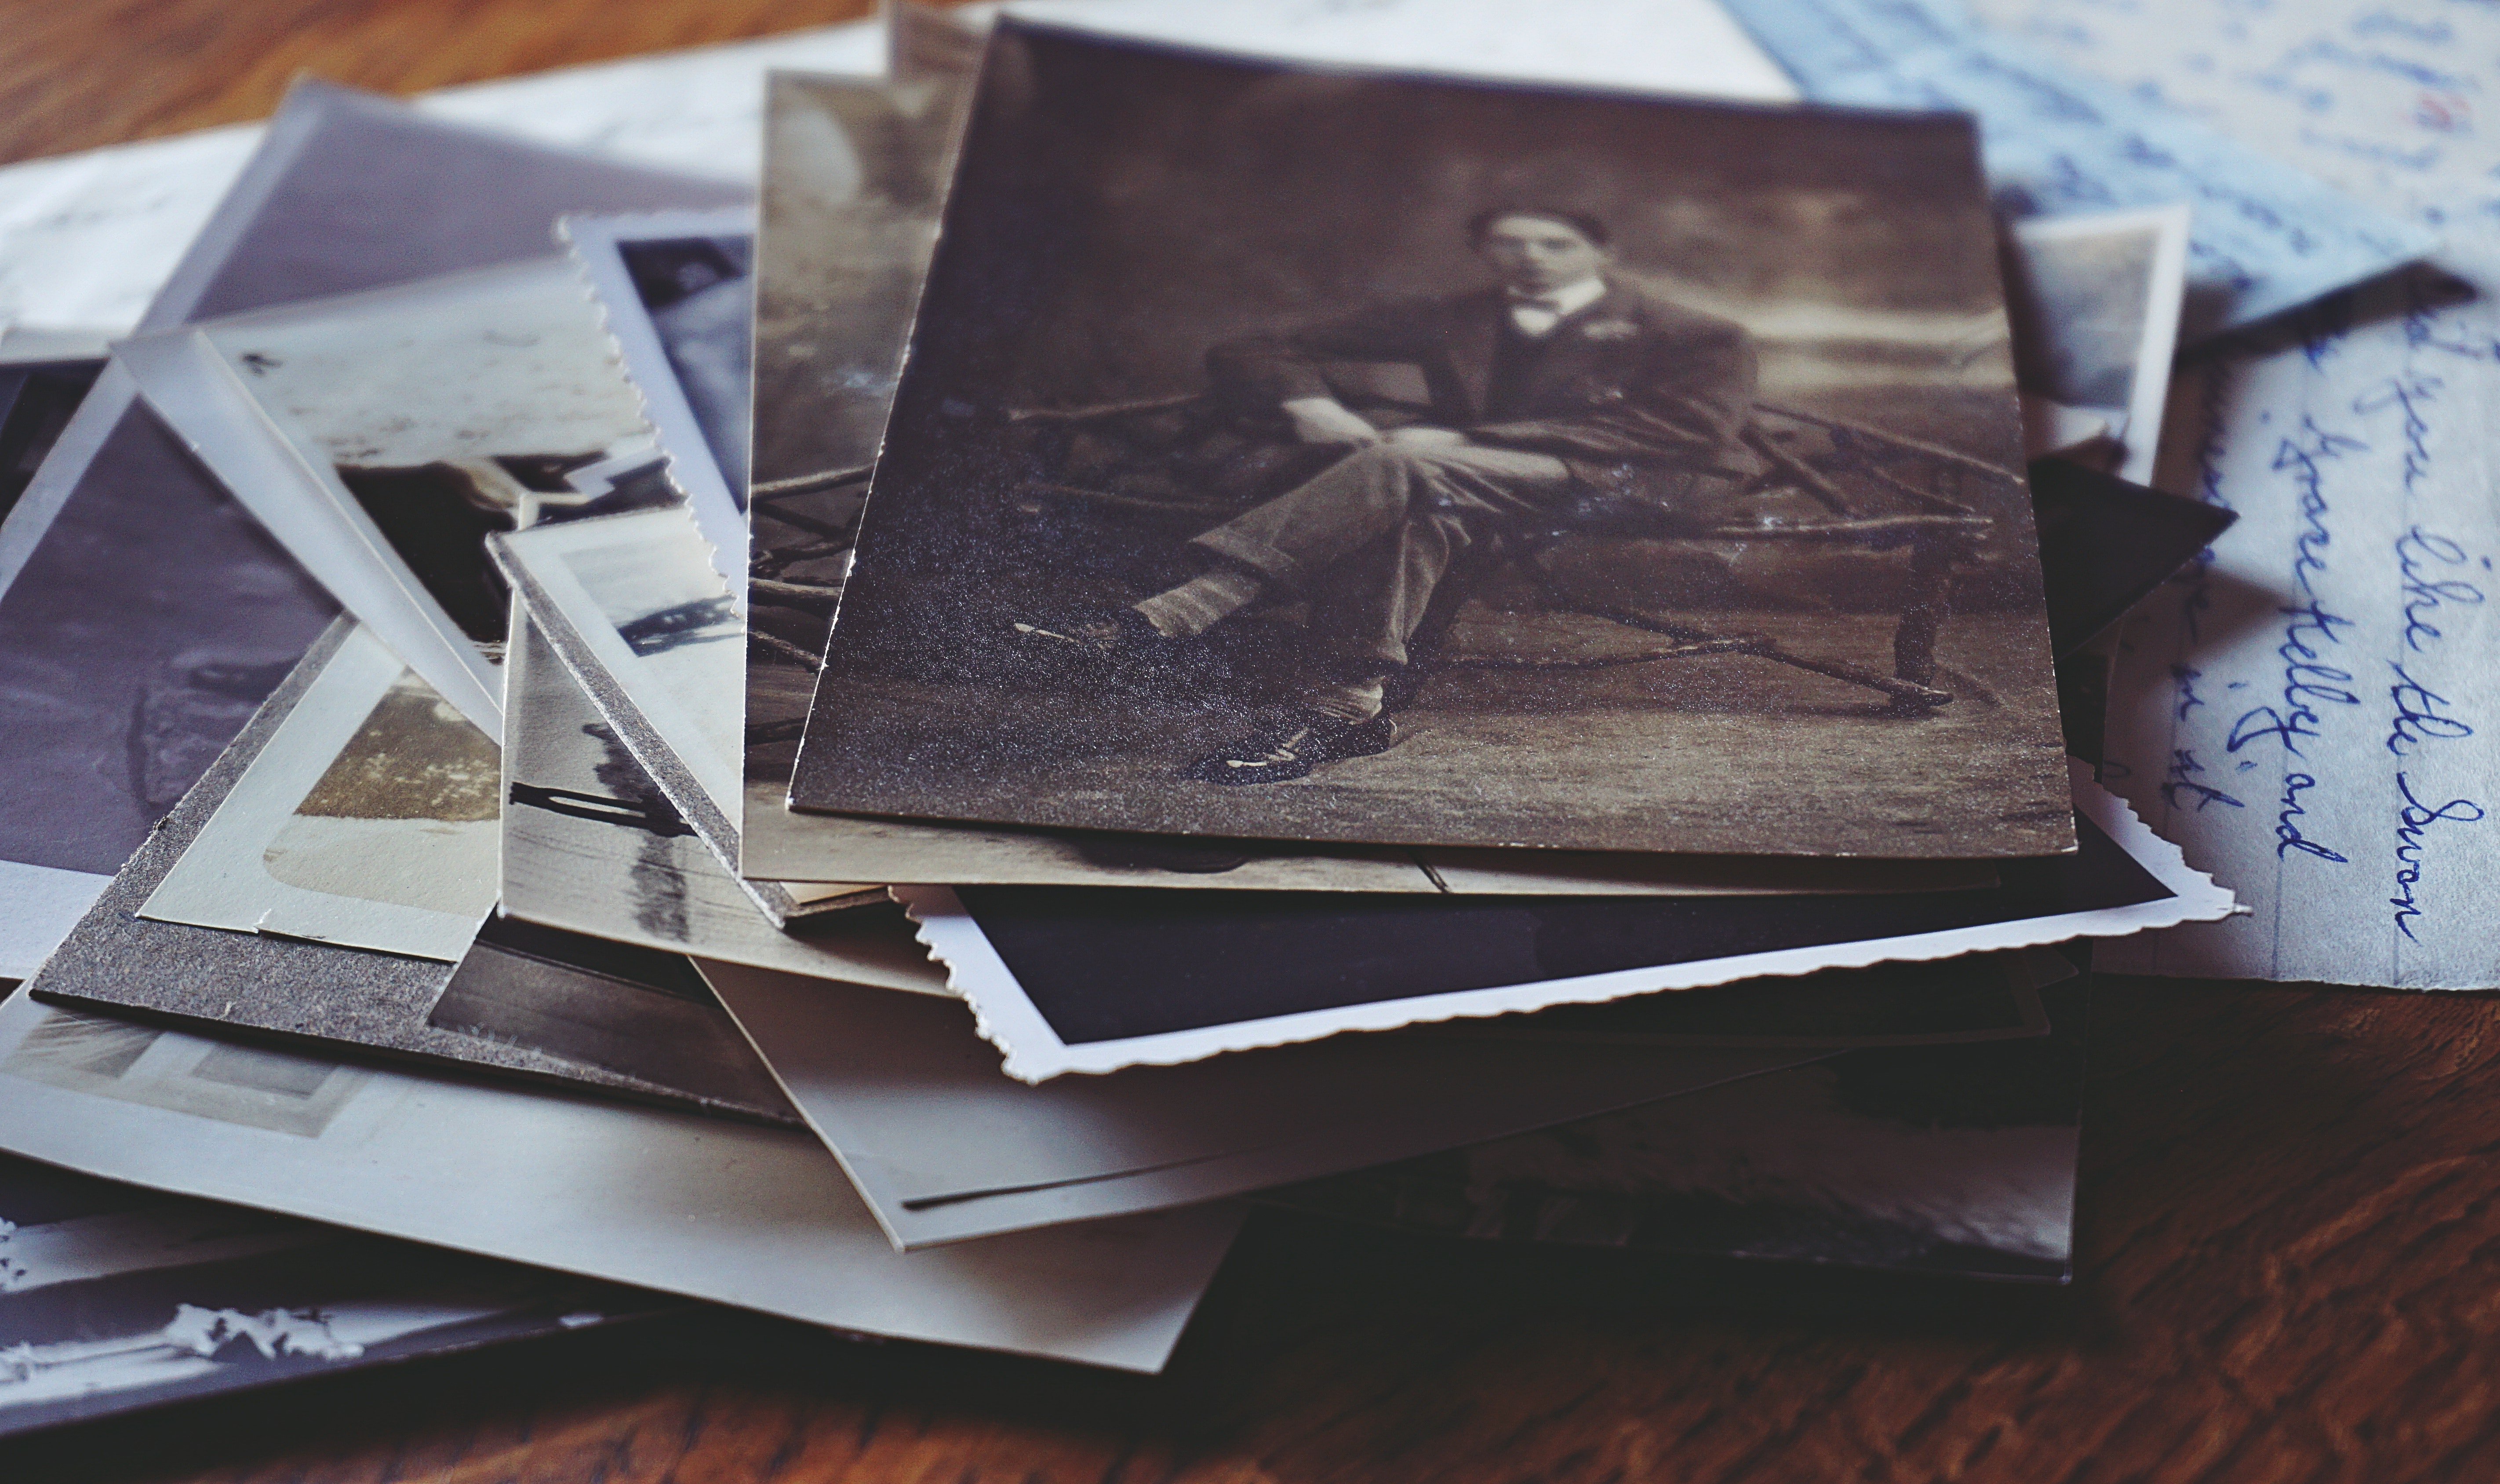 Karen looked through the old letters and photos left behind by her father. | Source: Pexels